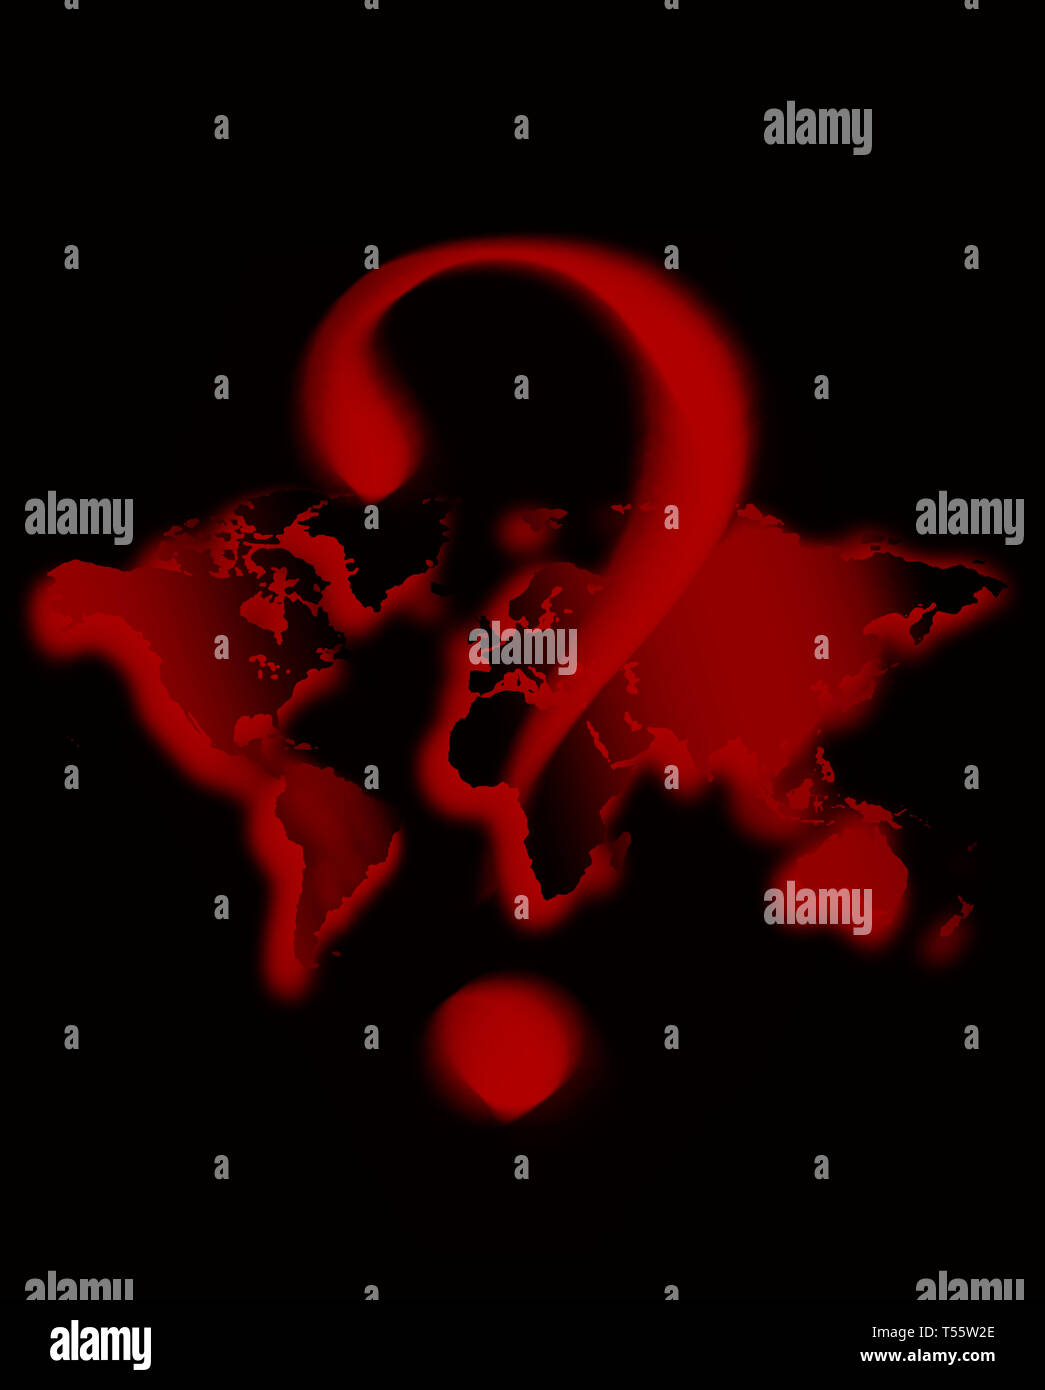 Illustration of red question mark over world map Stock Photo